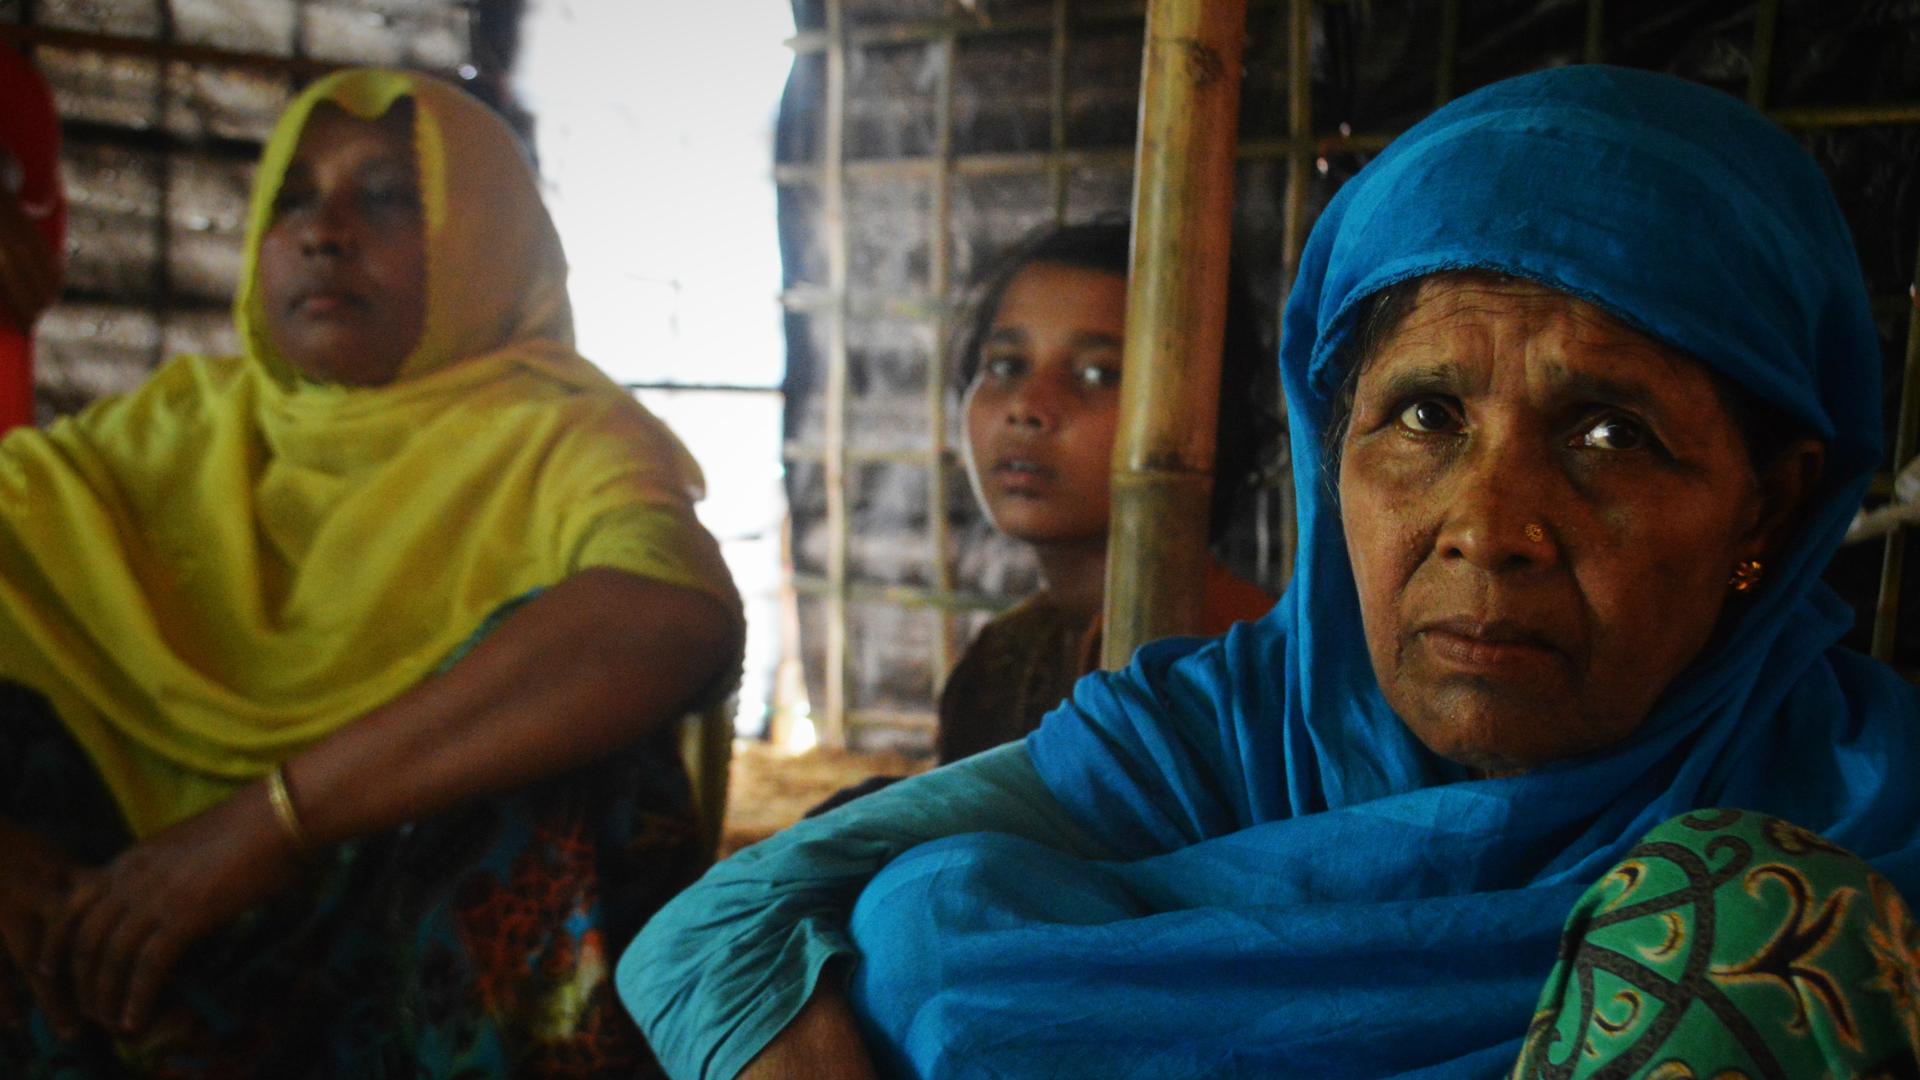 Busara Khatun, right, is a Rohingya refugee living in a camp in Bangladesh. Her son was killed in an elephant attack. 